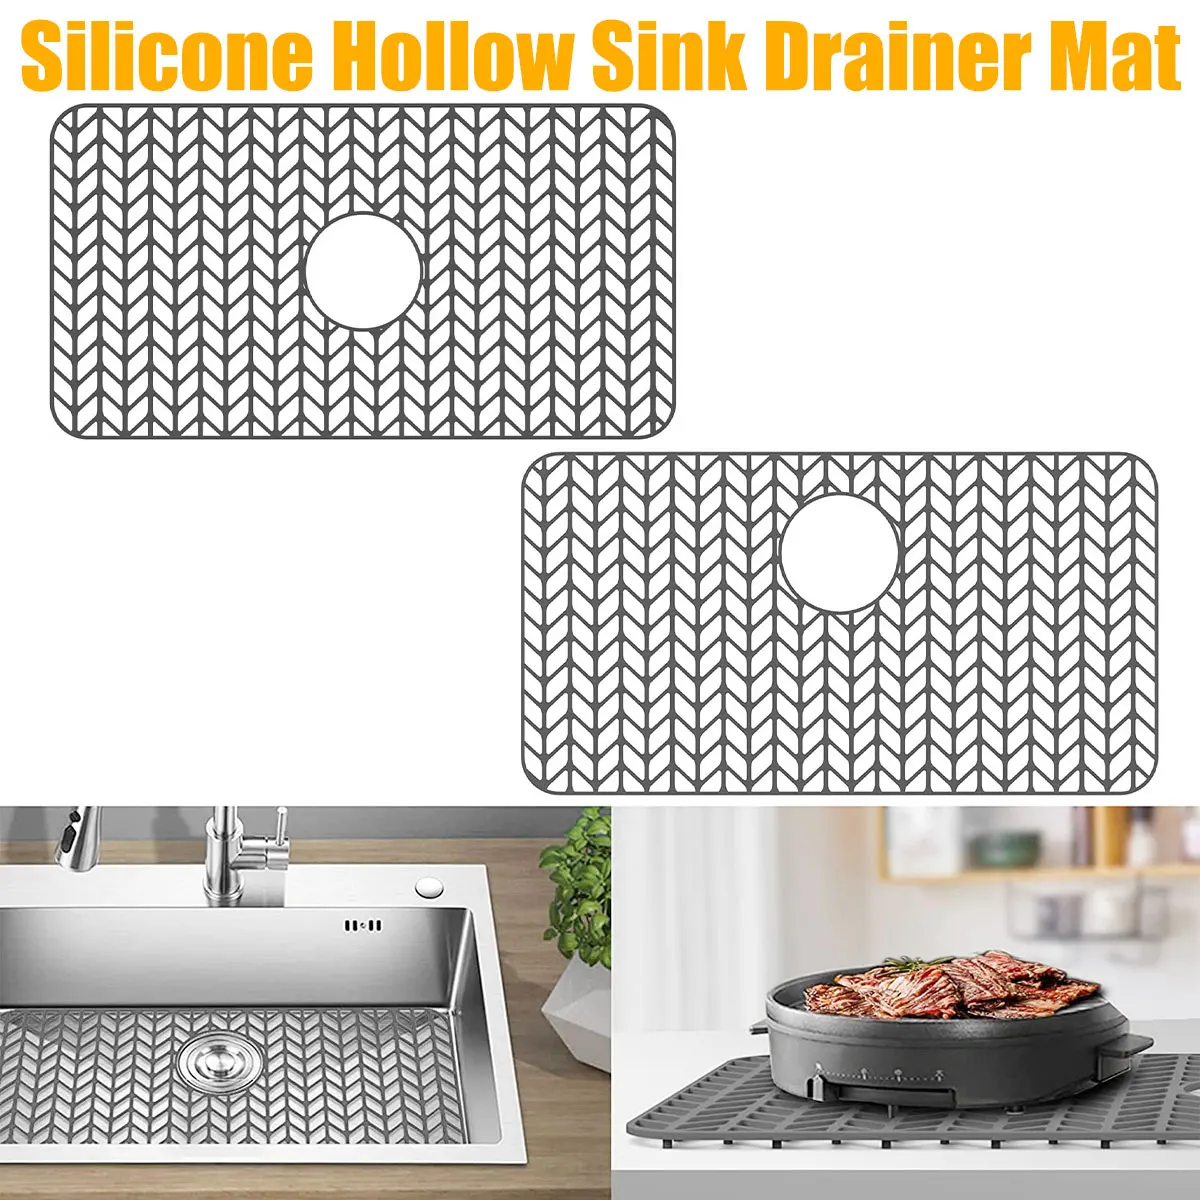 https://ae01.alicdn.com/kf/Sda44f049a2fb473997ef868c710e15f2Y/Kitchen-Silicone-Sink-Protector-Mat-Anti-Slip-Heat-Resistant-Grid-Sink-Mat-Dish-Drainer-For-Kitchen.jpg